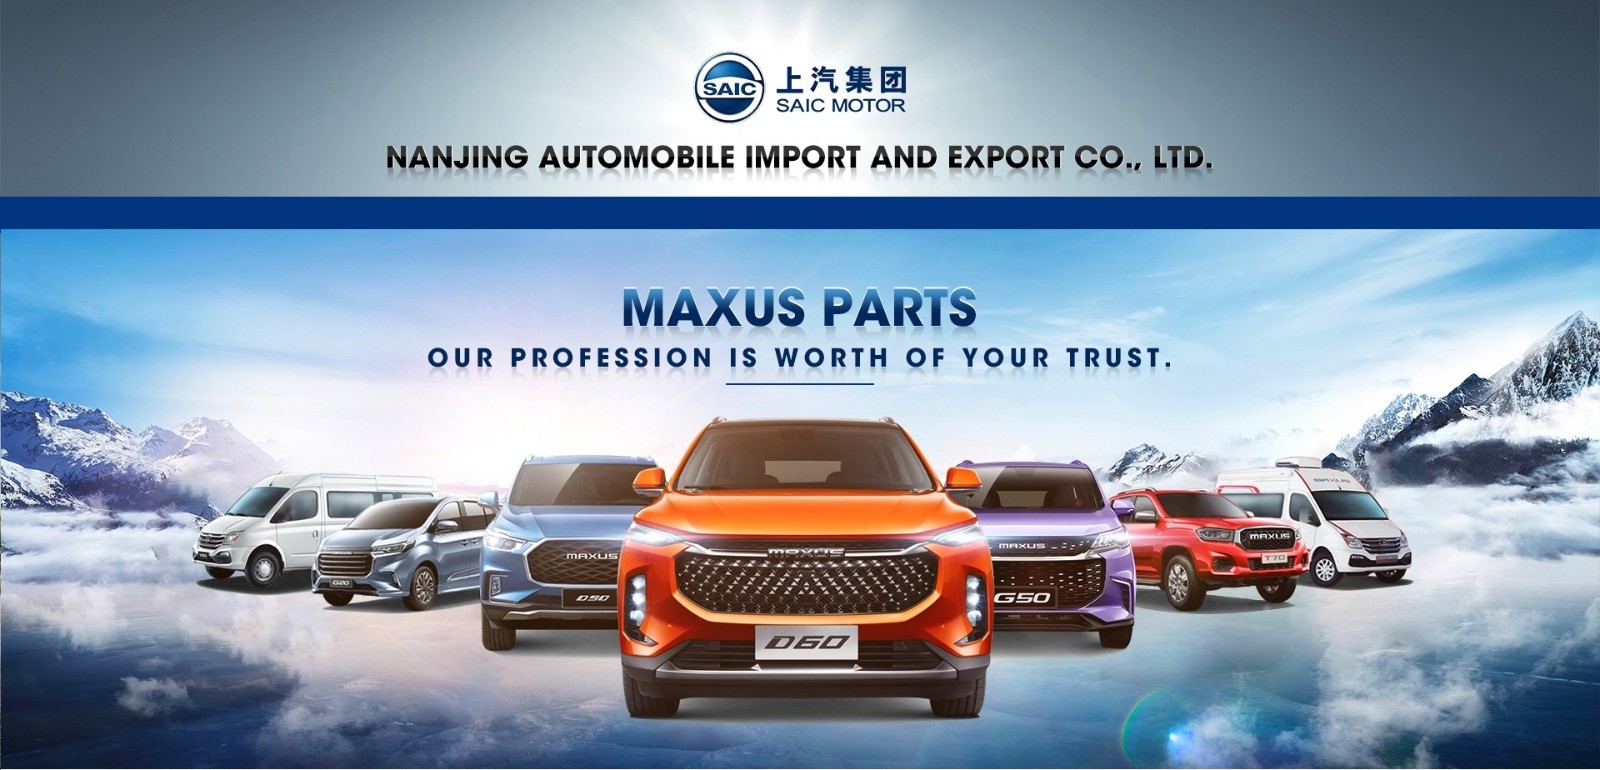 All spare parts of MAXUS brand